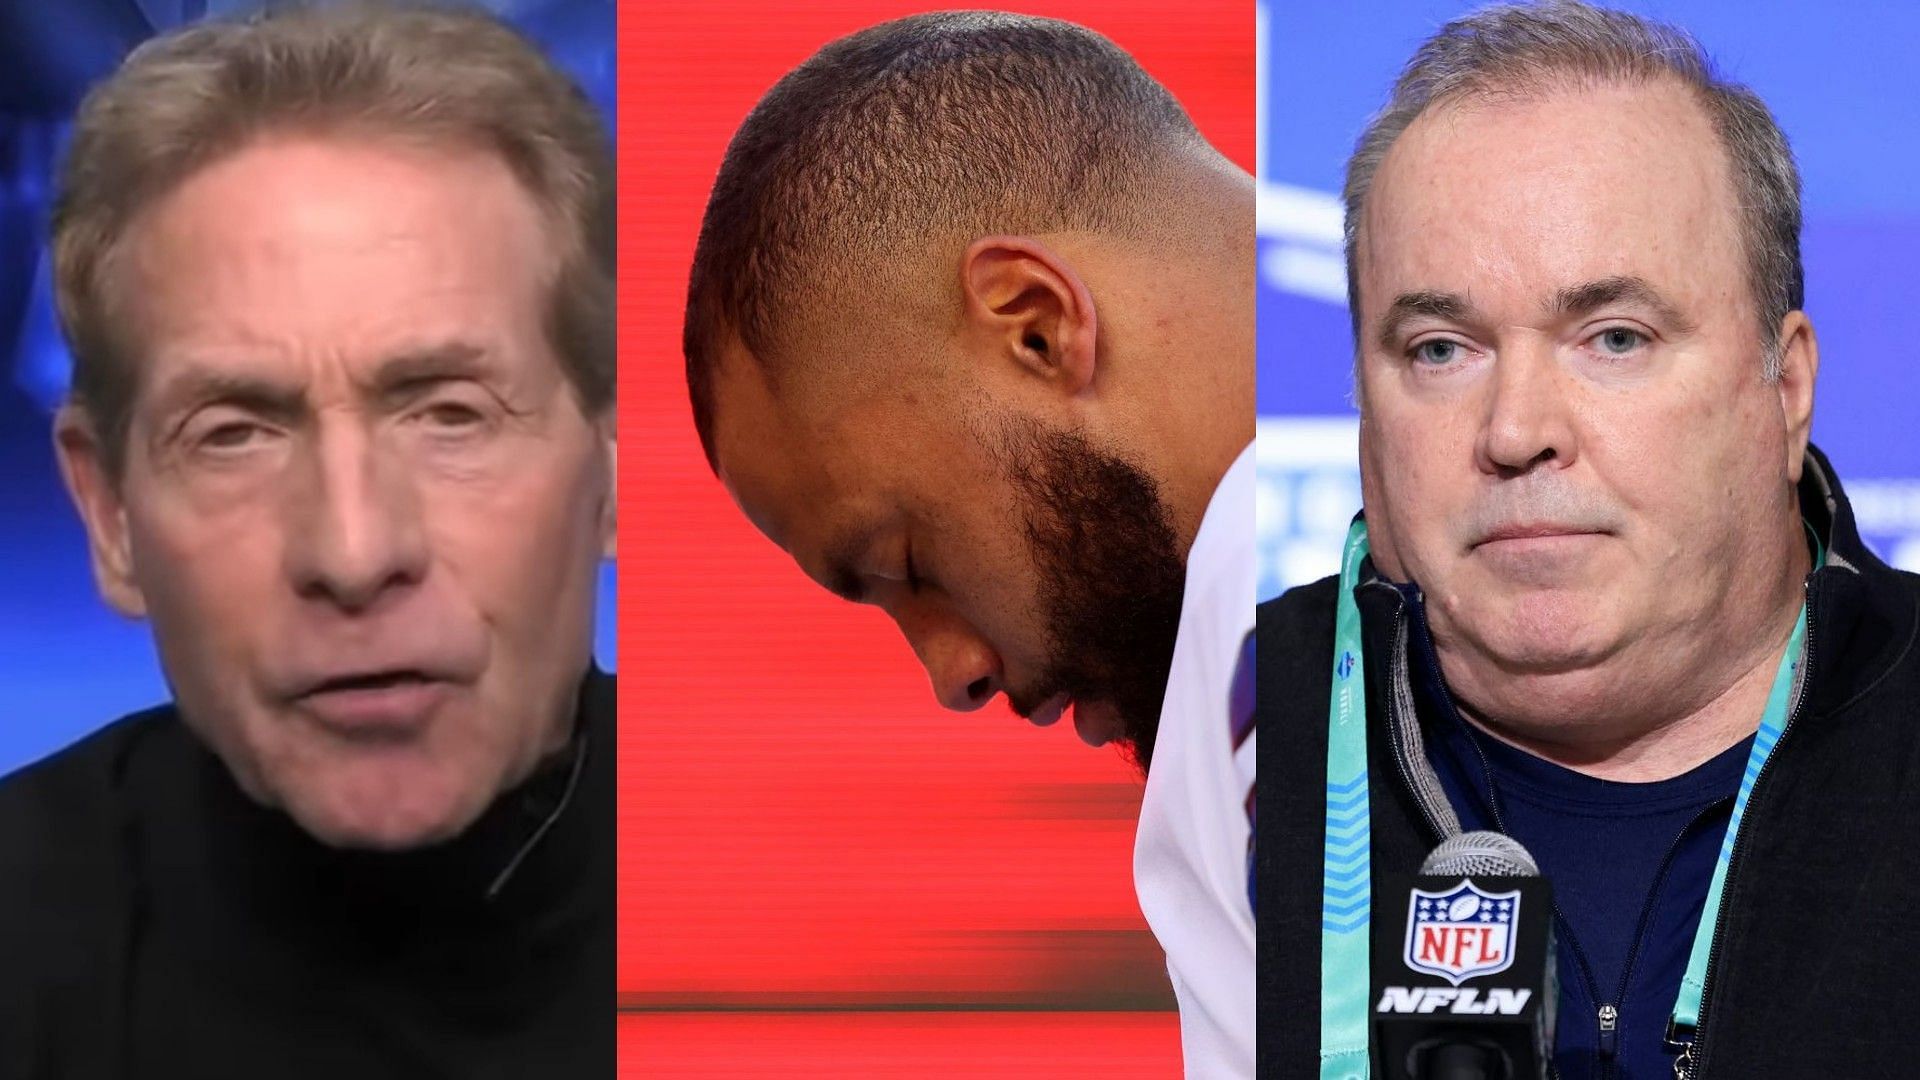 Dak Prescott and Mike McCarthy get dumped by Skip Bayless - Courtesy of Undisputed on YouTube